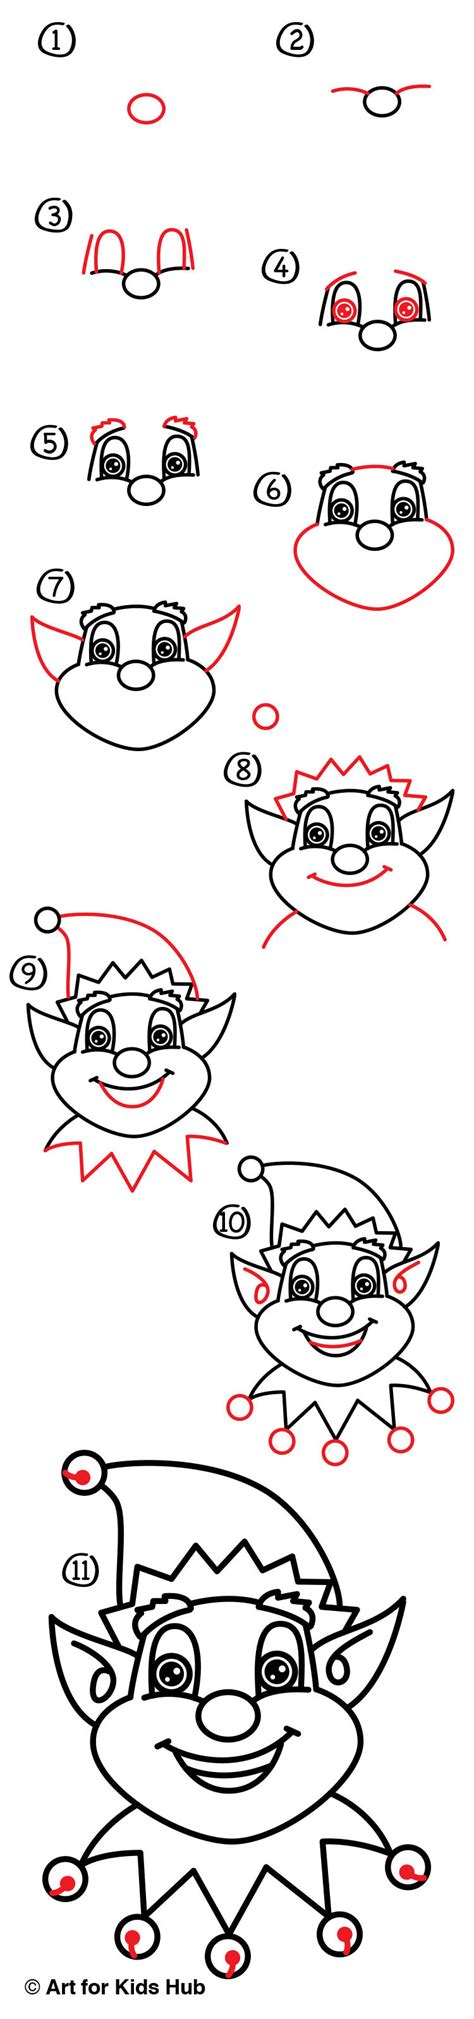 How To Draw A Chibi Christmas Elf Step By Step Drawin